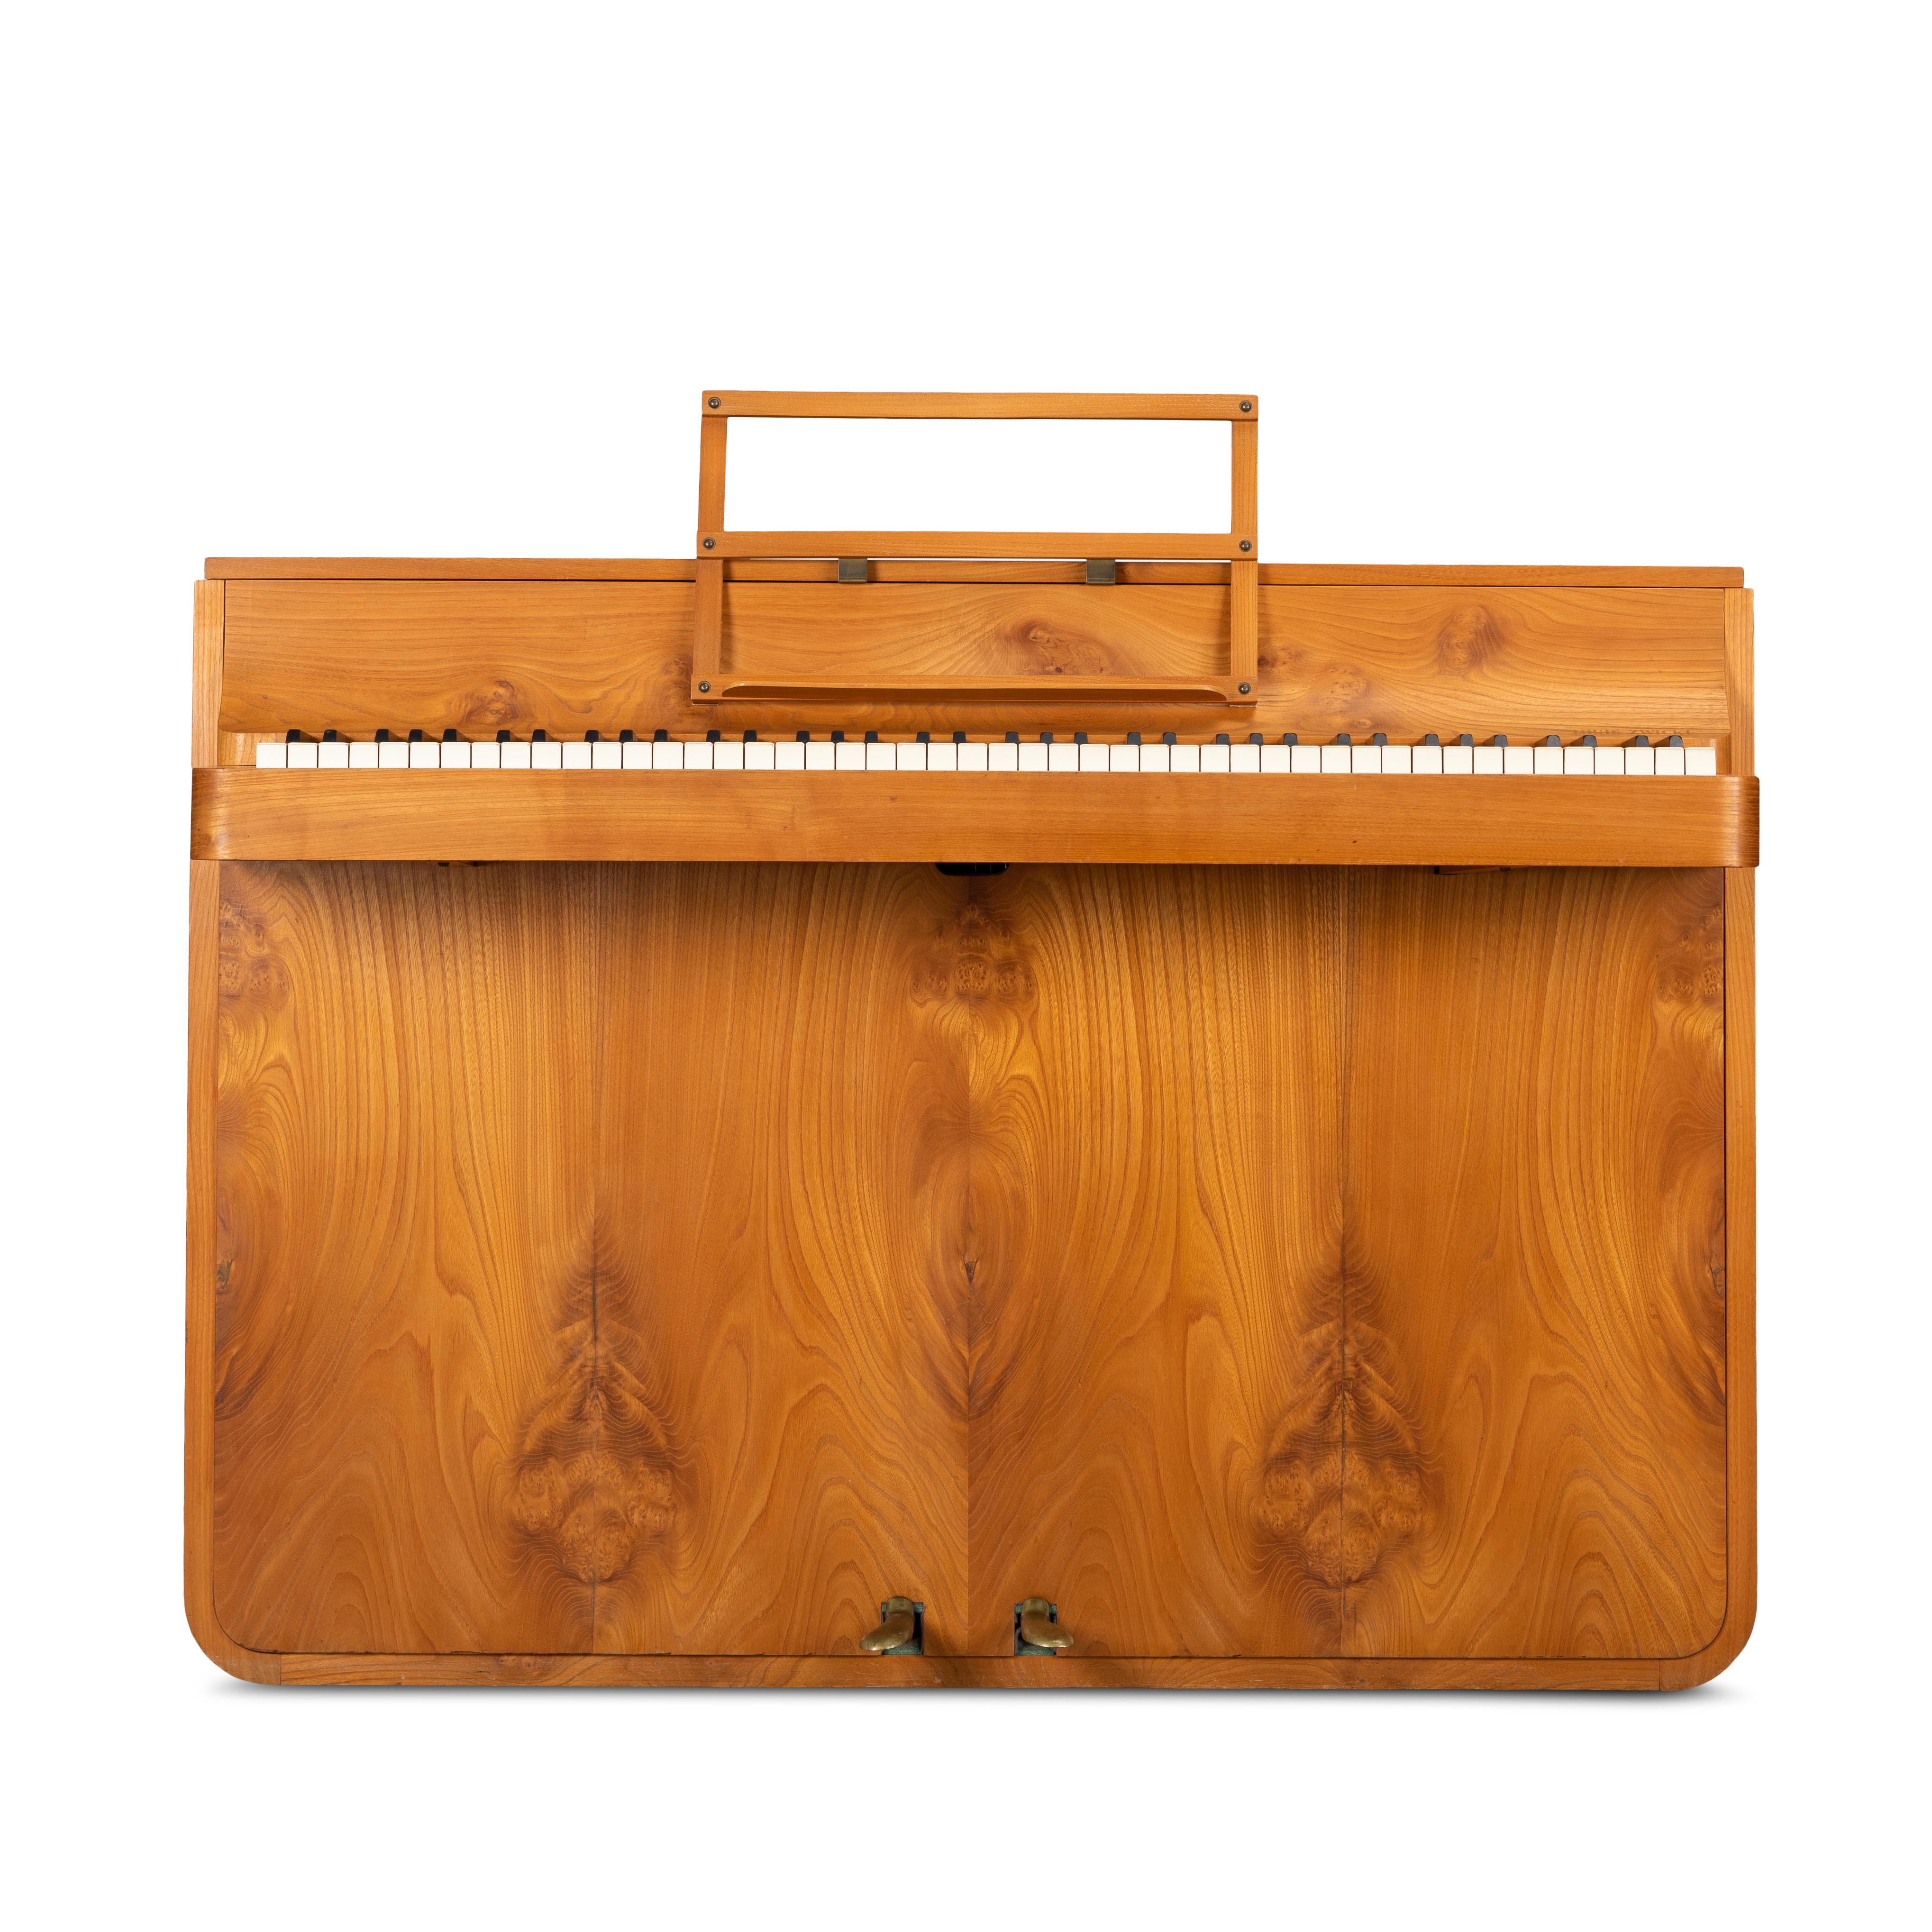 A rare Danish midcentury pianette made of magnificent oak. It is called pianette due to the 82 keys rather than the standard 88 of a full size piano. This pianette is made by renowned piano maker Louis Zwicki. This piece stands out in a modern